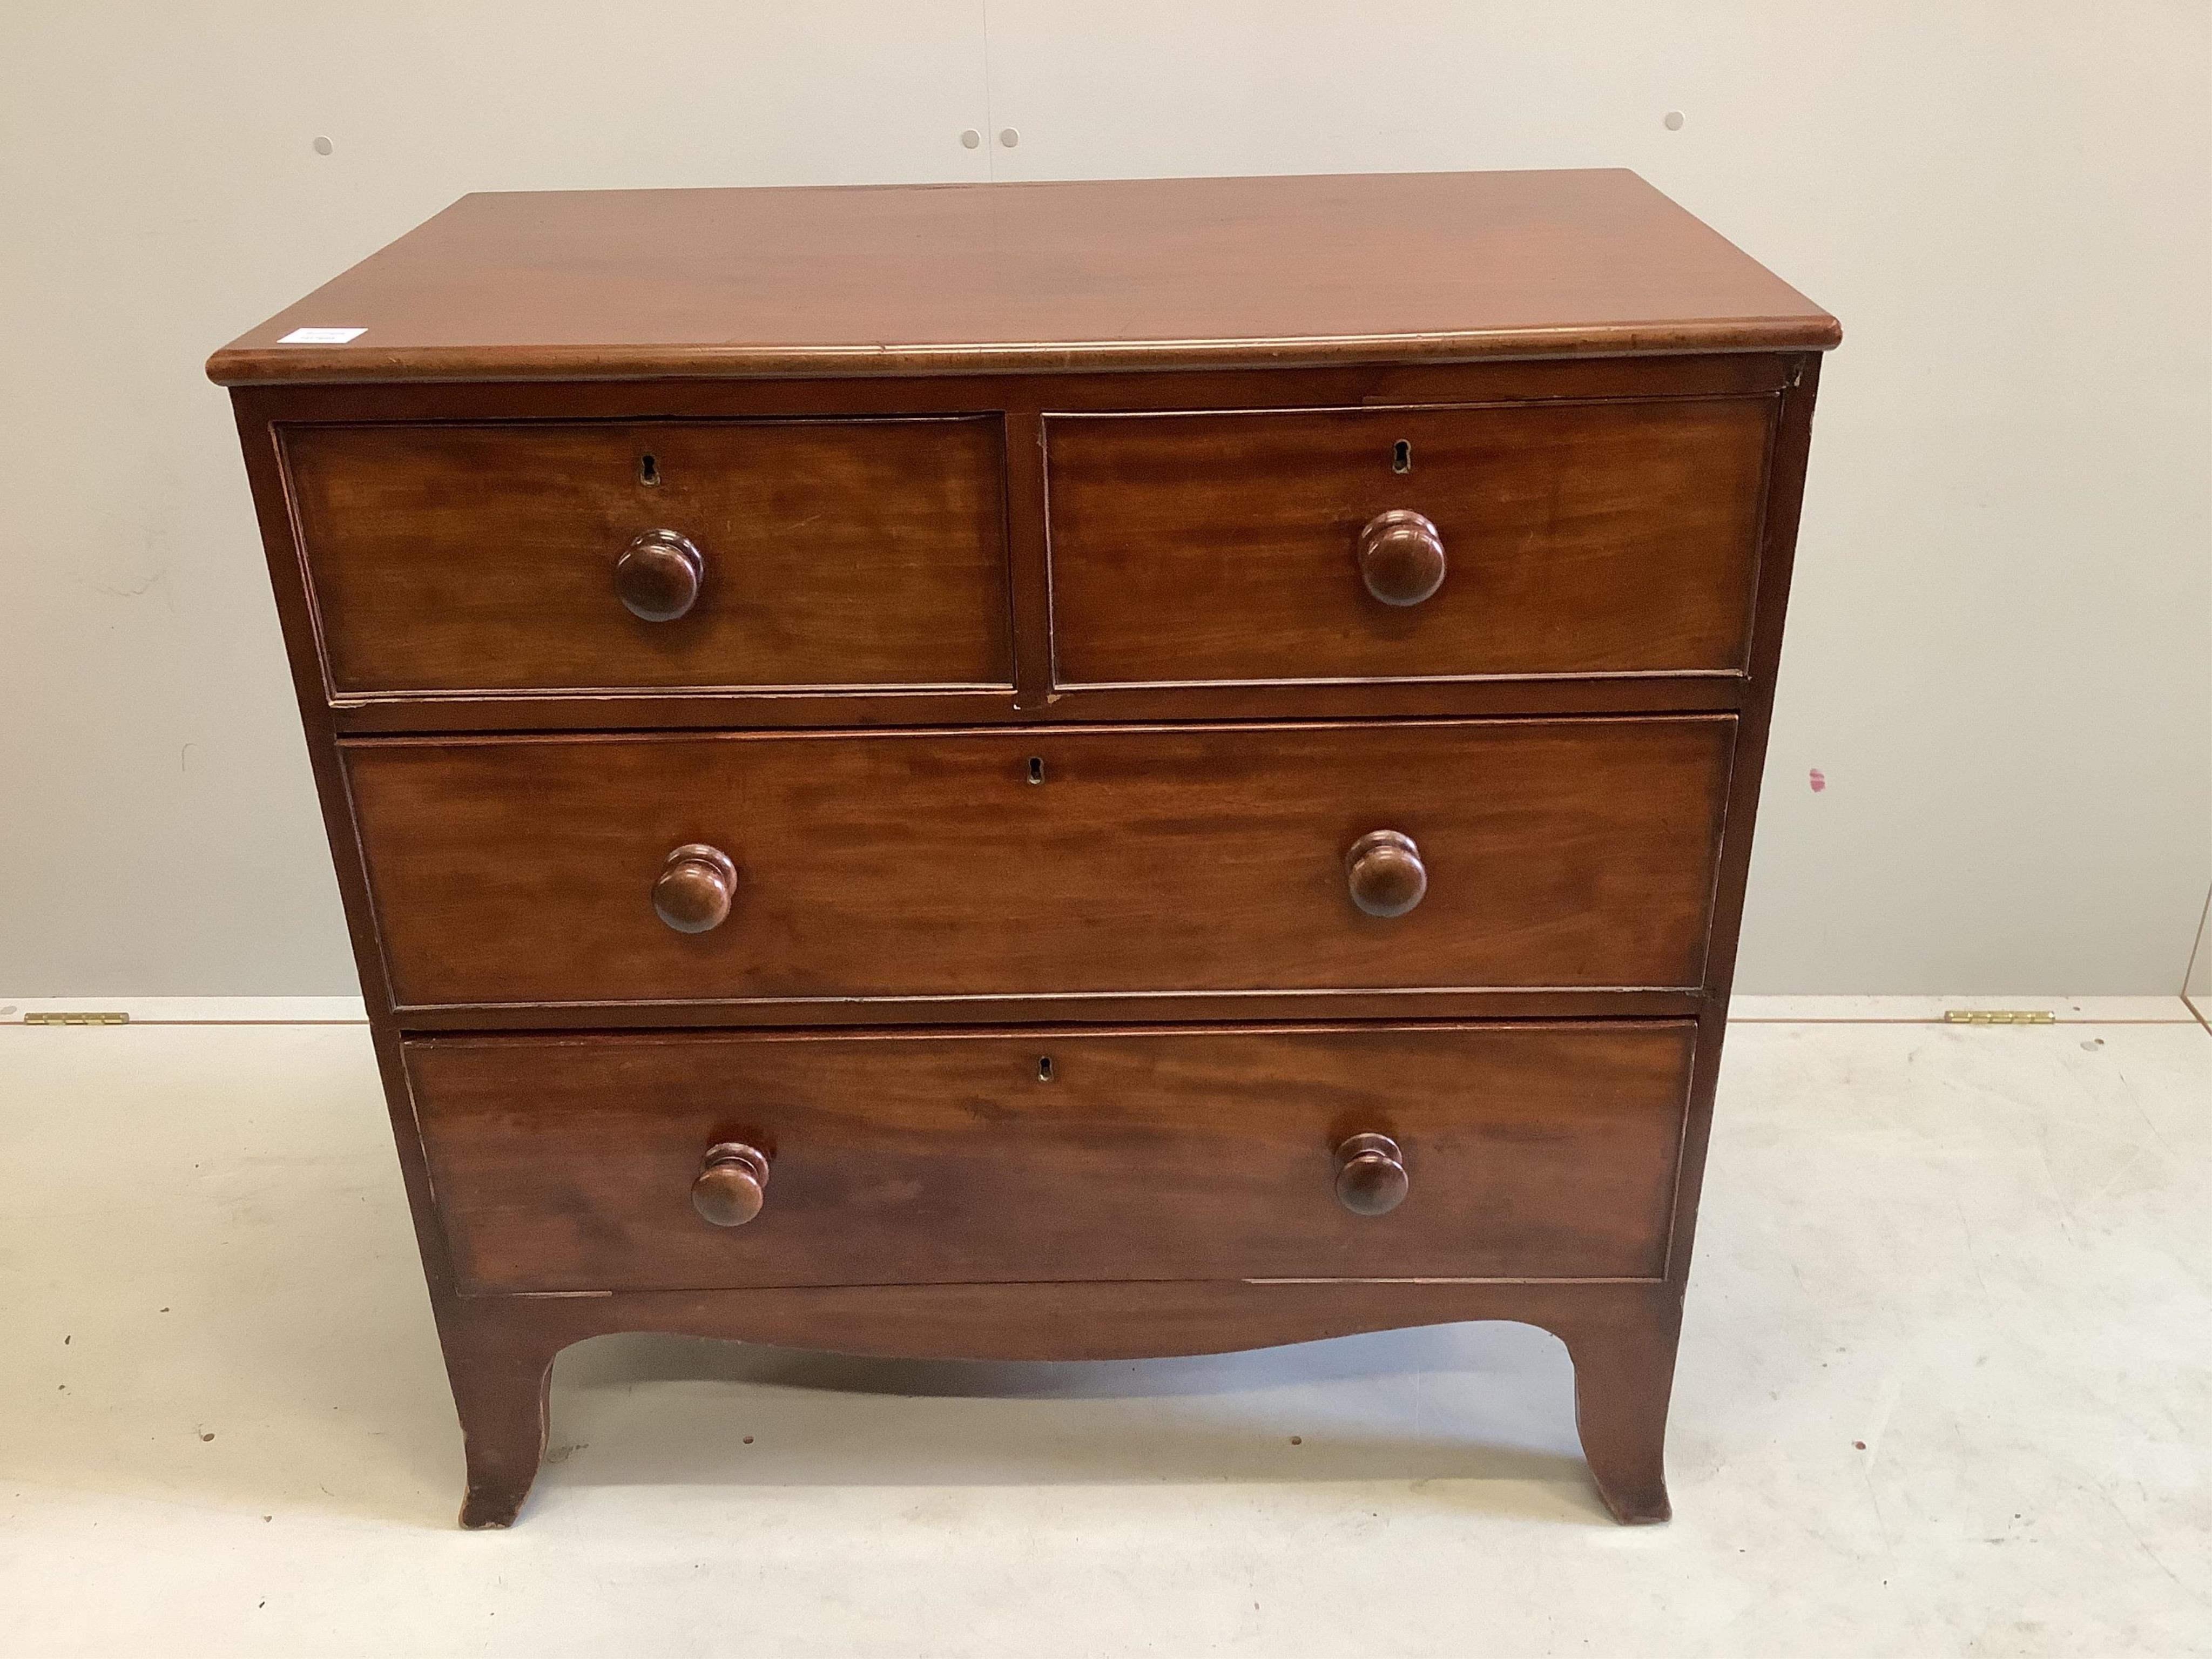 A small Victorian mahogany four drawer chest, width 90cm, depth 47cm, height 89cm. Condition - fair